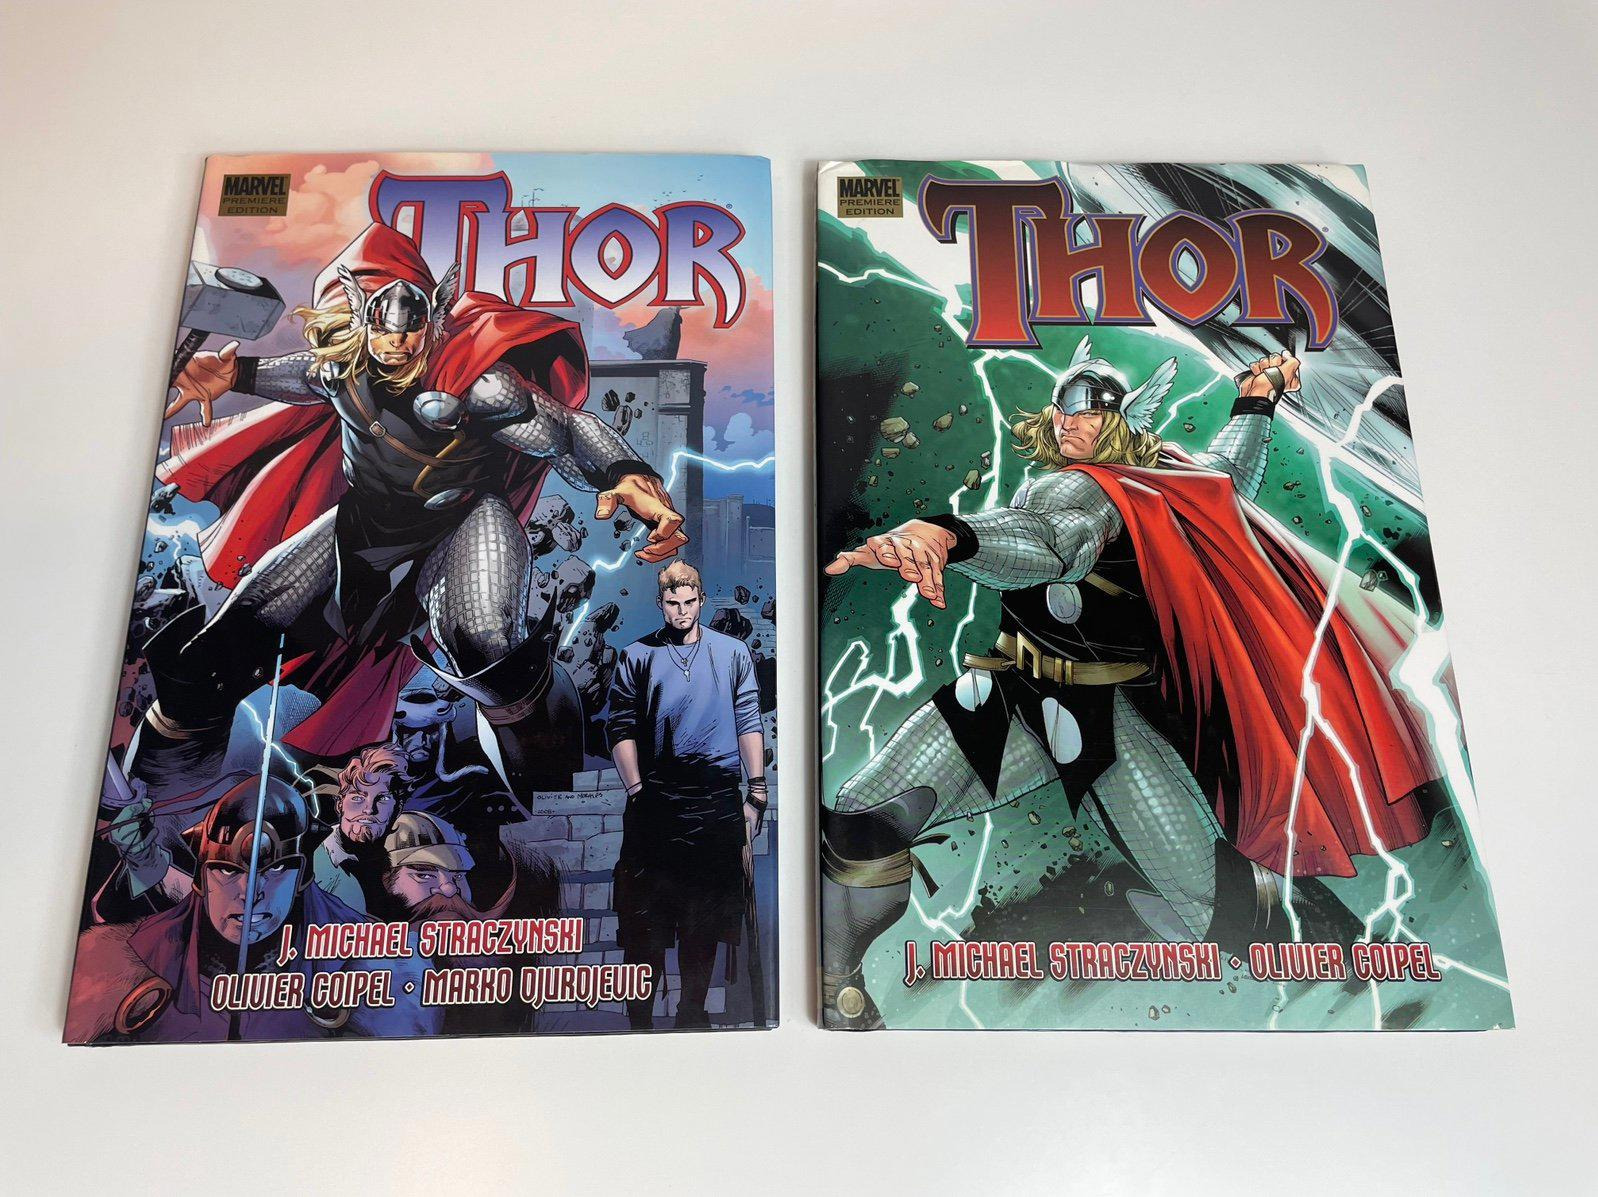 Thor by Straczynski Coipel Vol 1 & 2 Hardcover 1st Edition Excellent